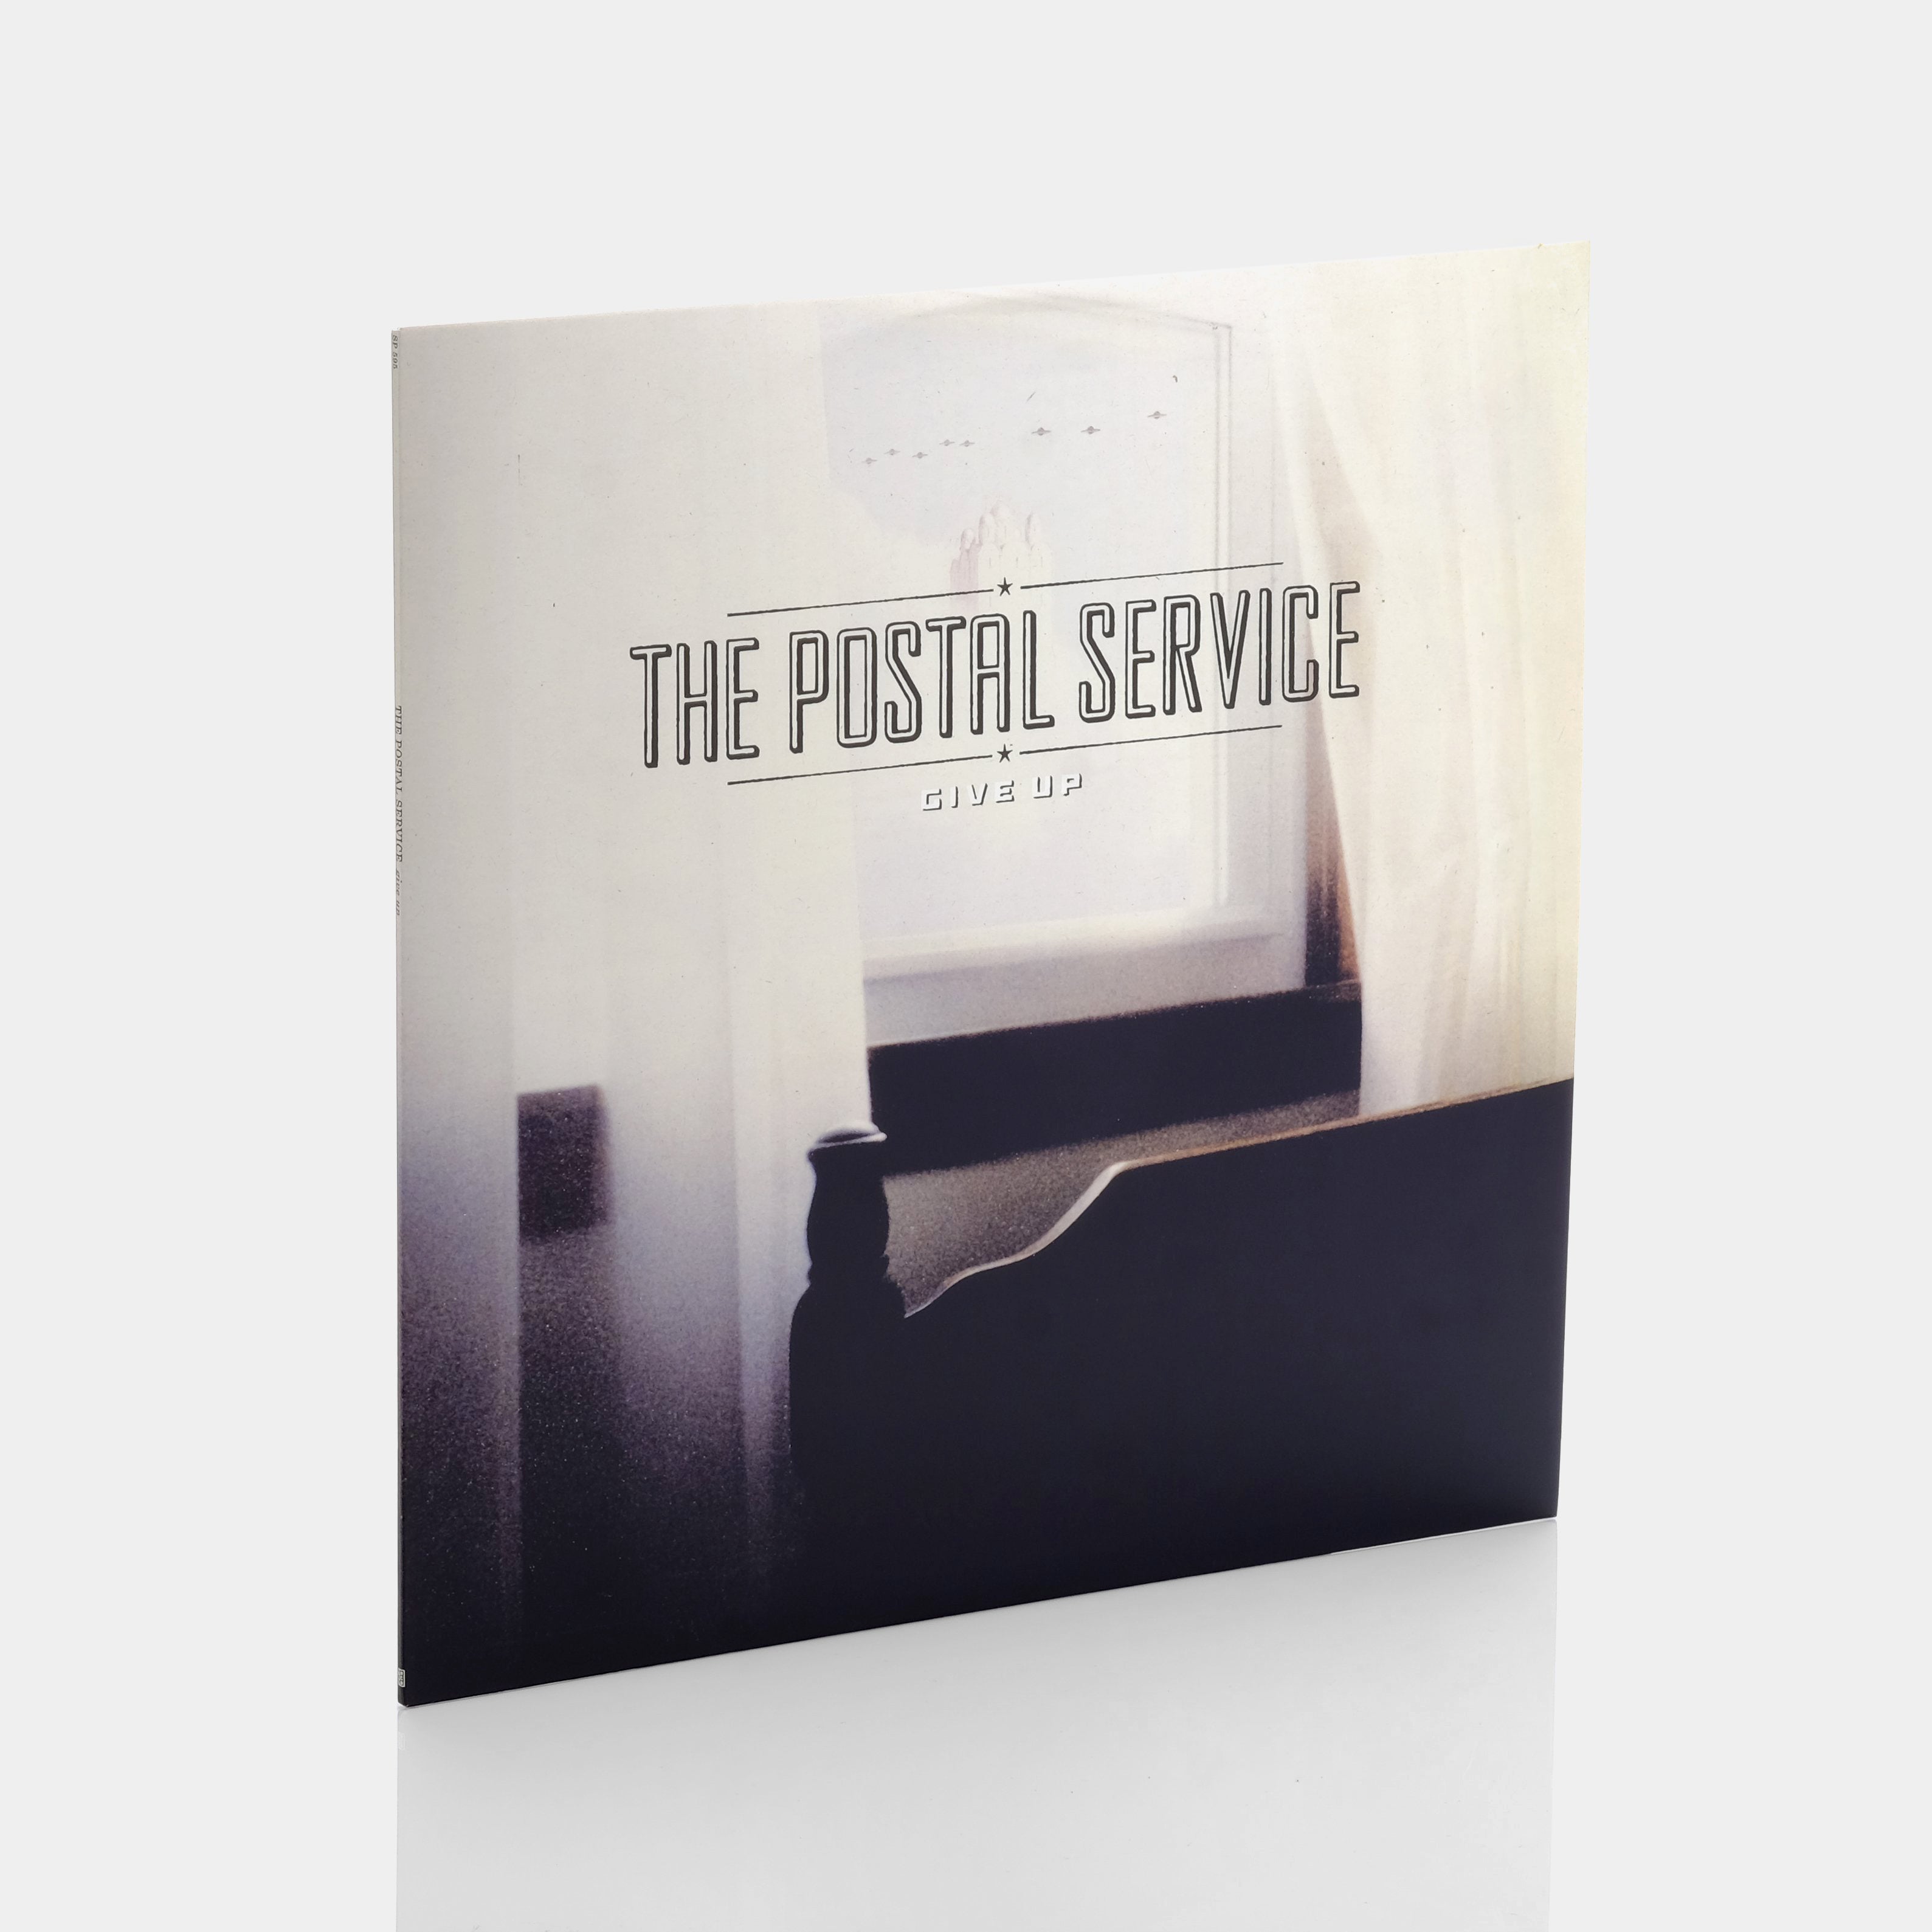 The Postal Service - Give Up LP Vinyl Record